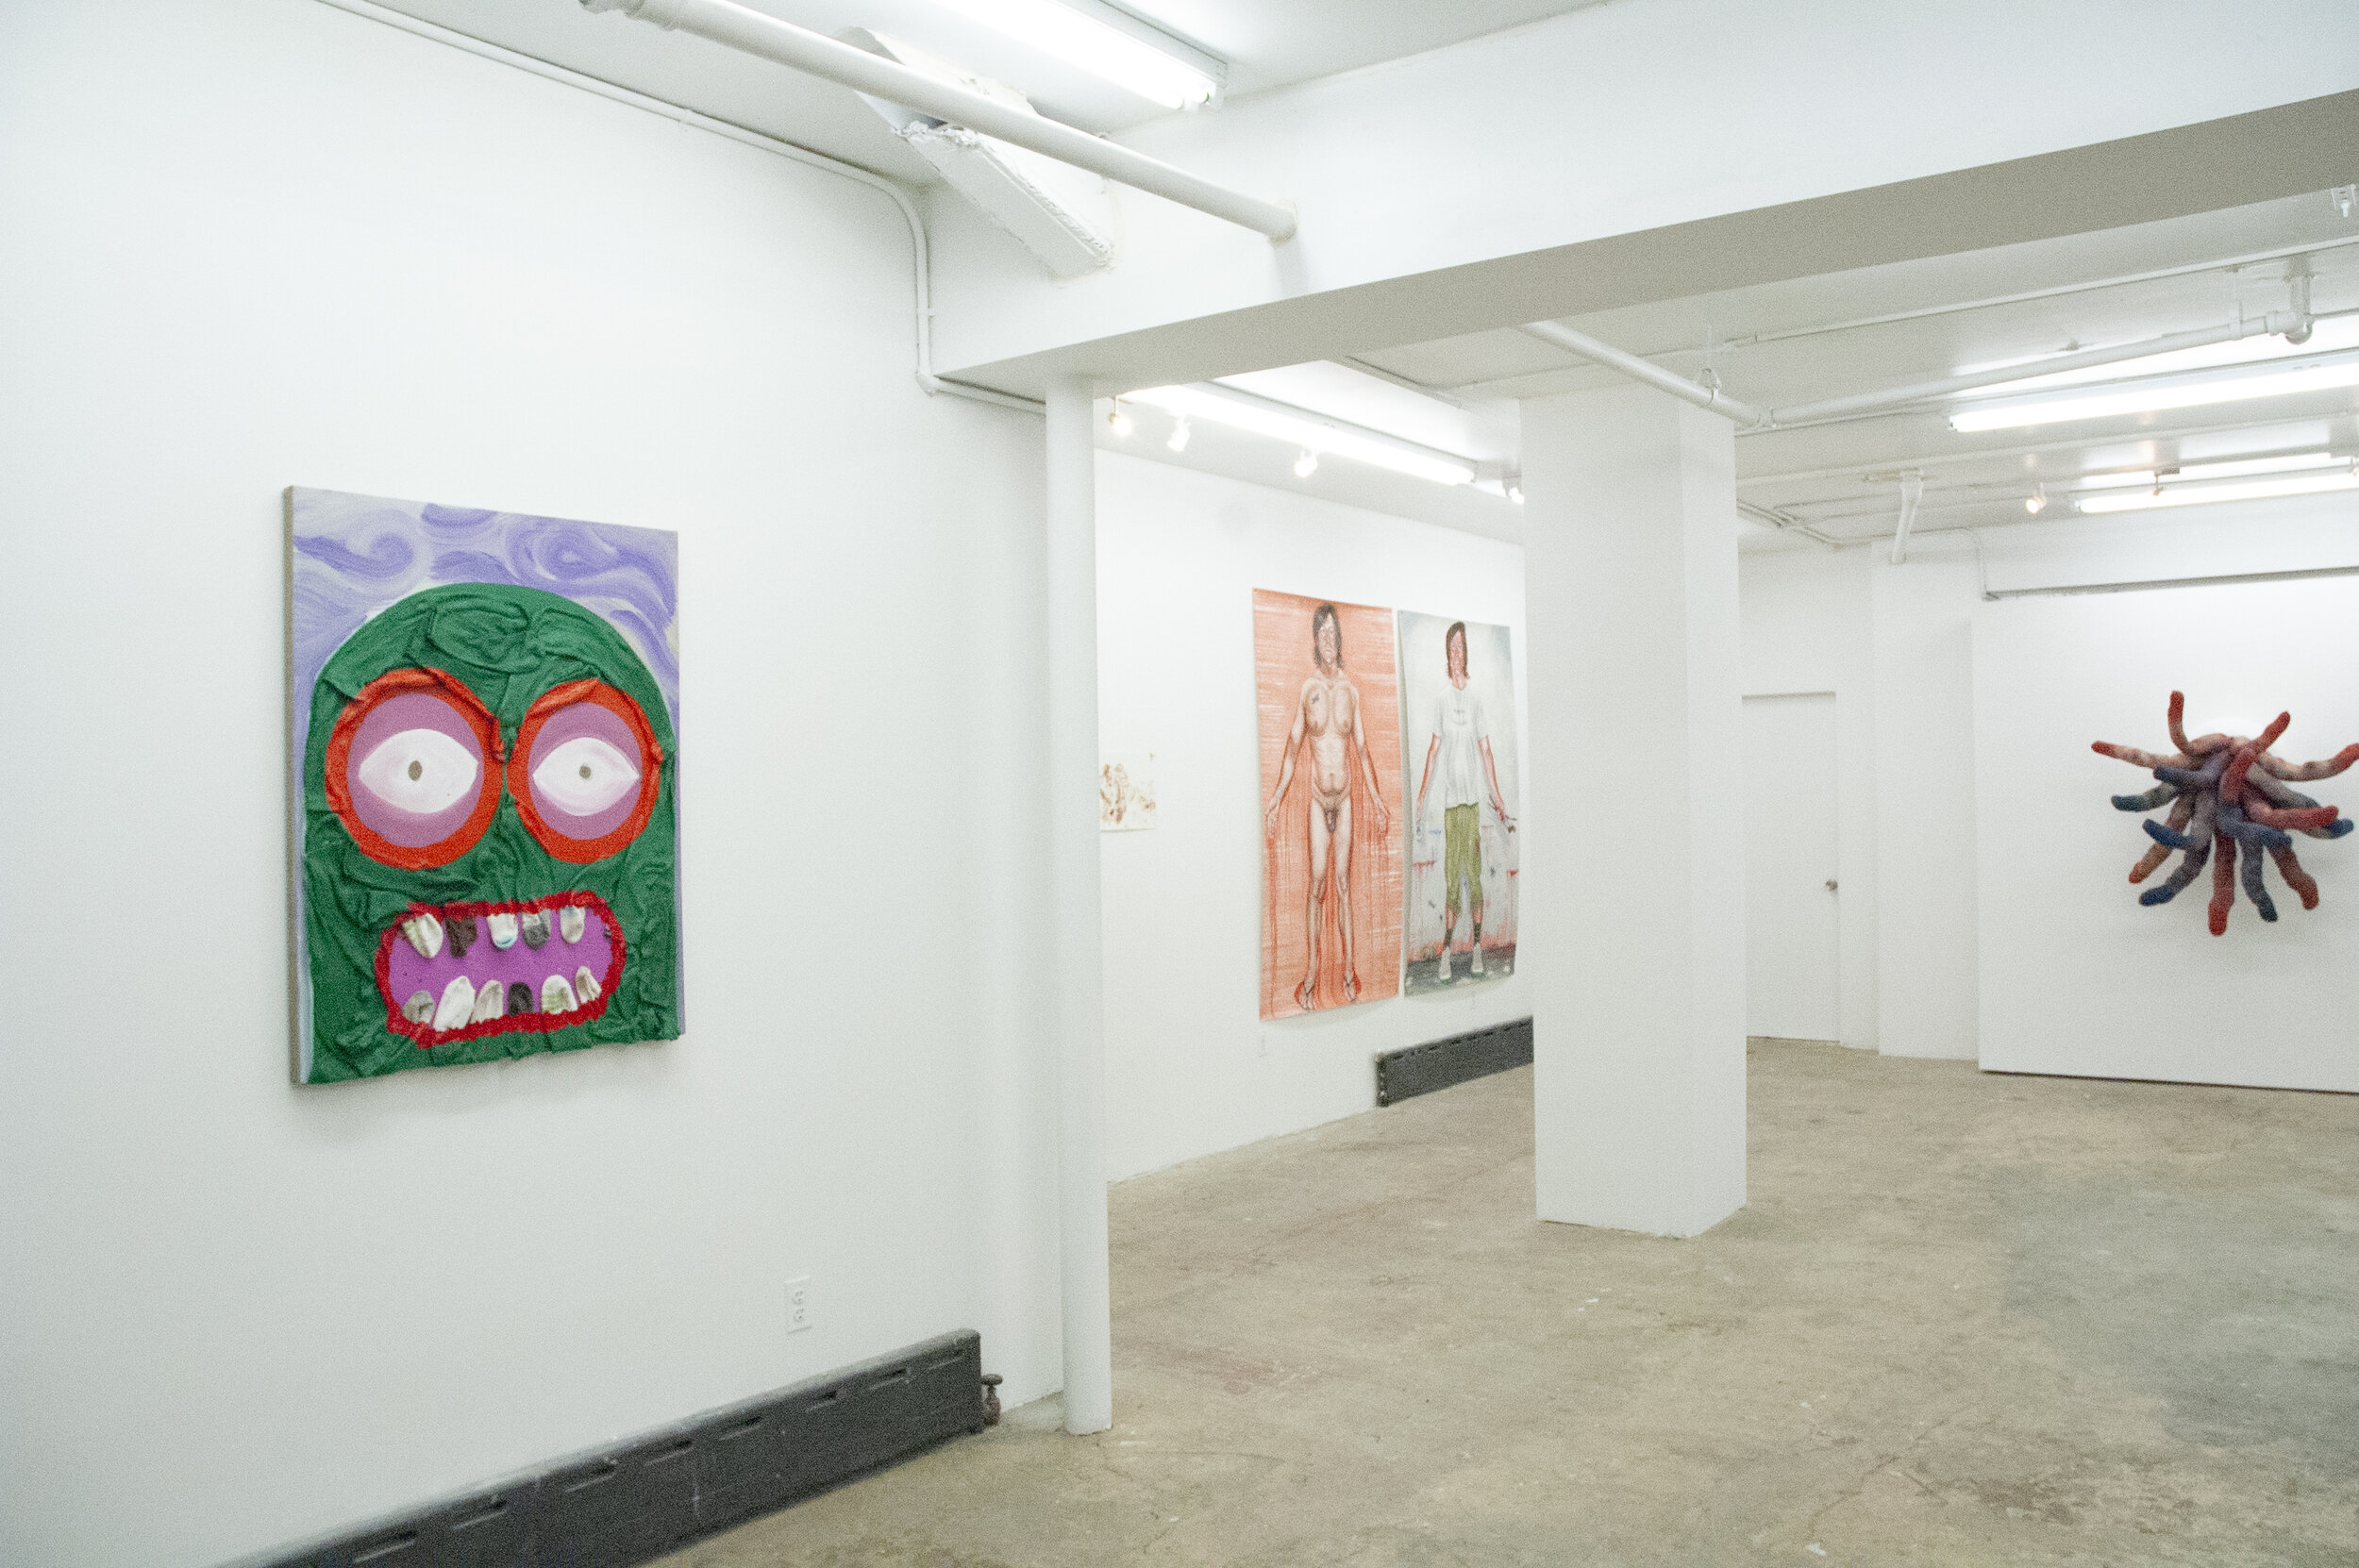 Hello Nasty, Curated by Chris Bors, featuring works by Chris Bors, Paul Brainard, Dawn Frasch, Aaron Johnson, Hein Koh, Tom Sanford, Aaron Zimmerman, at Cindy Rucker Gallery